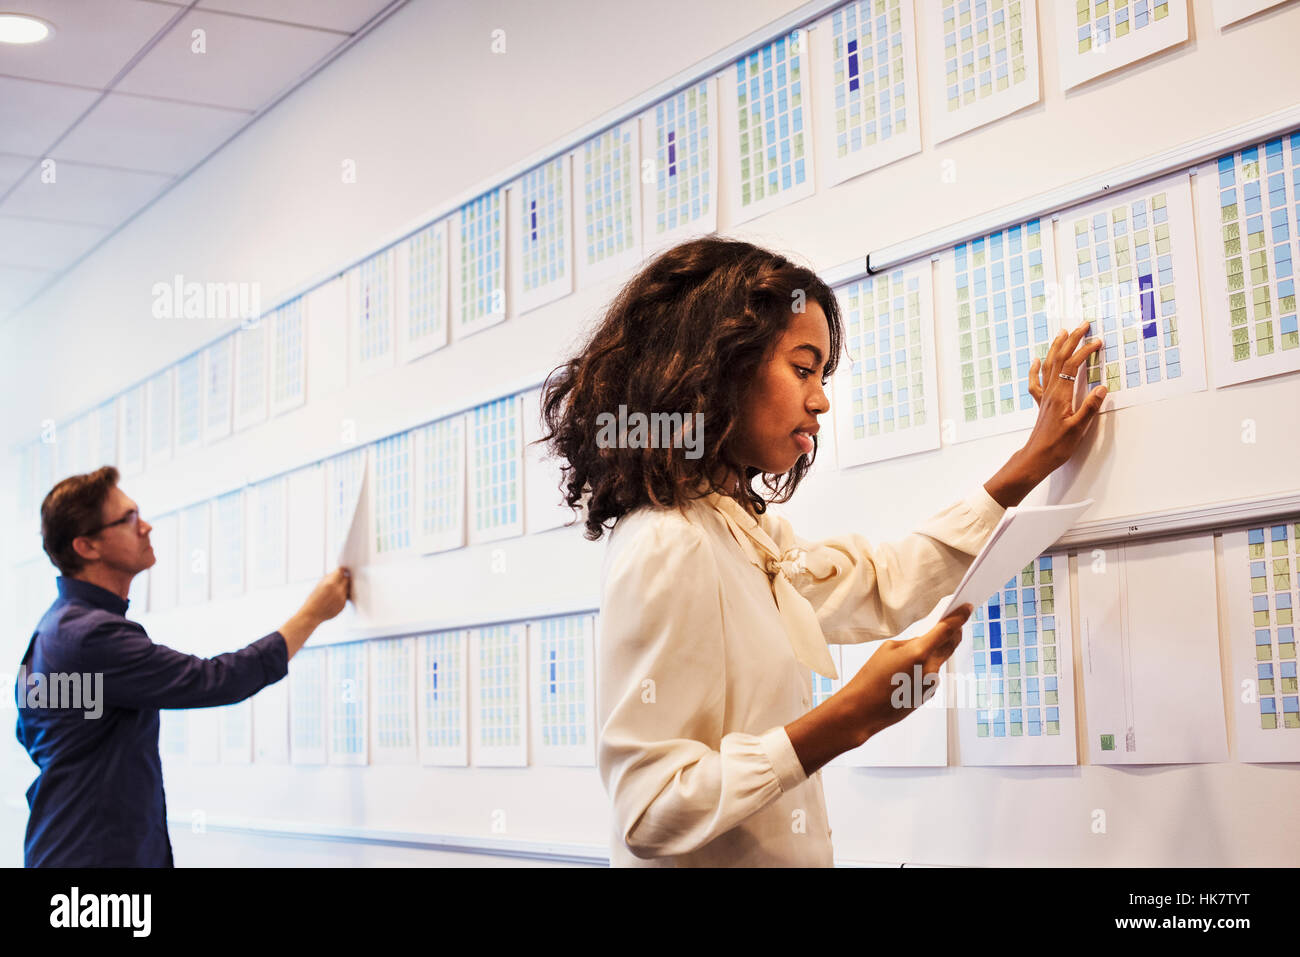 A woman and a man standing in an office adding pieces of paper to a display on a wall. Stock Photo